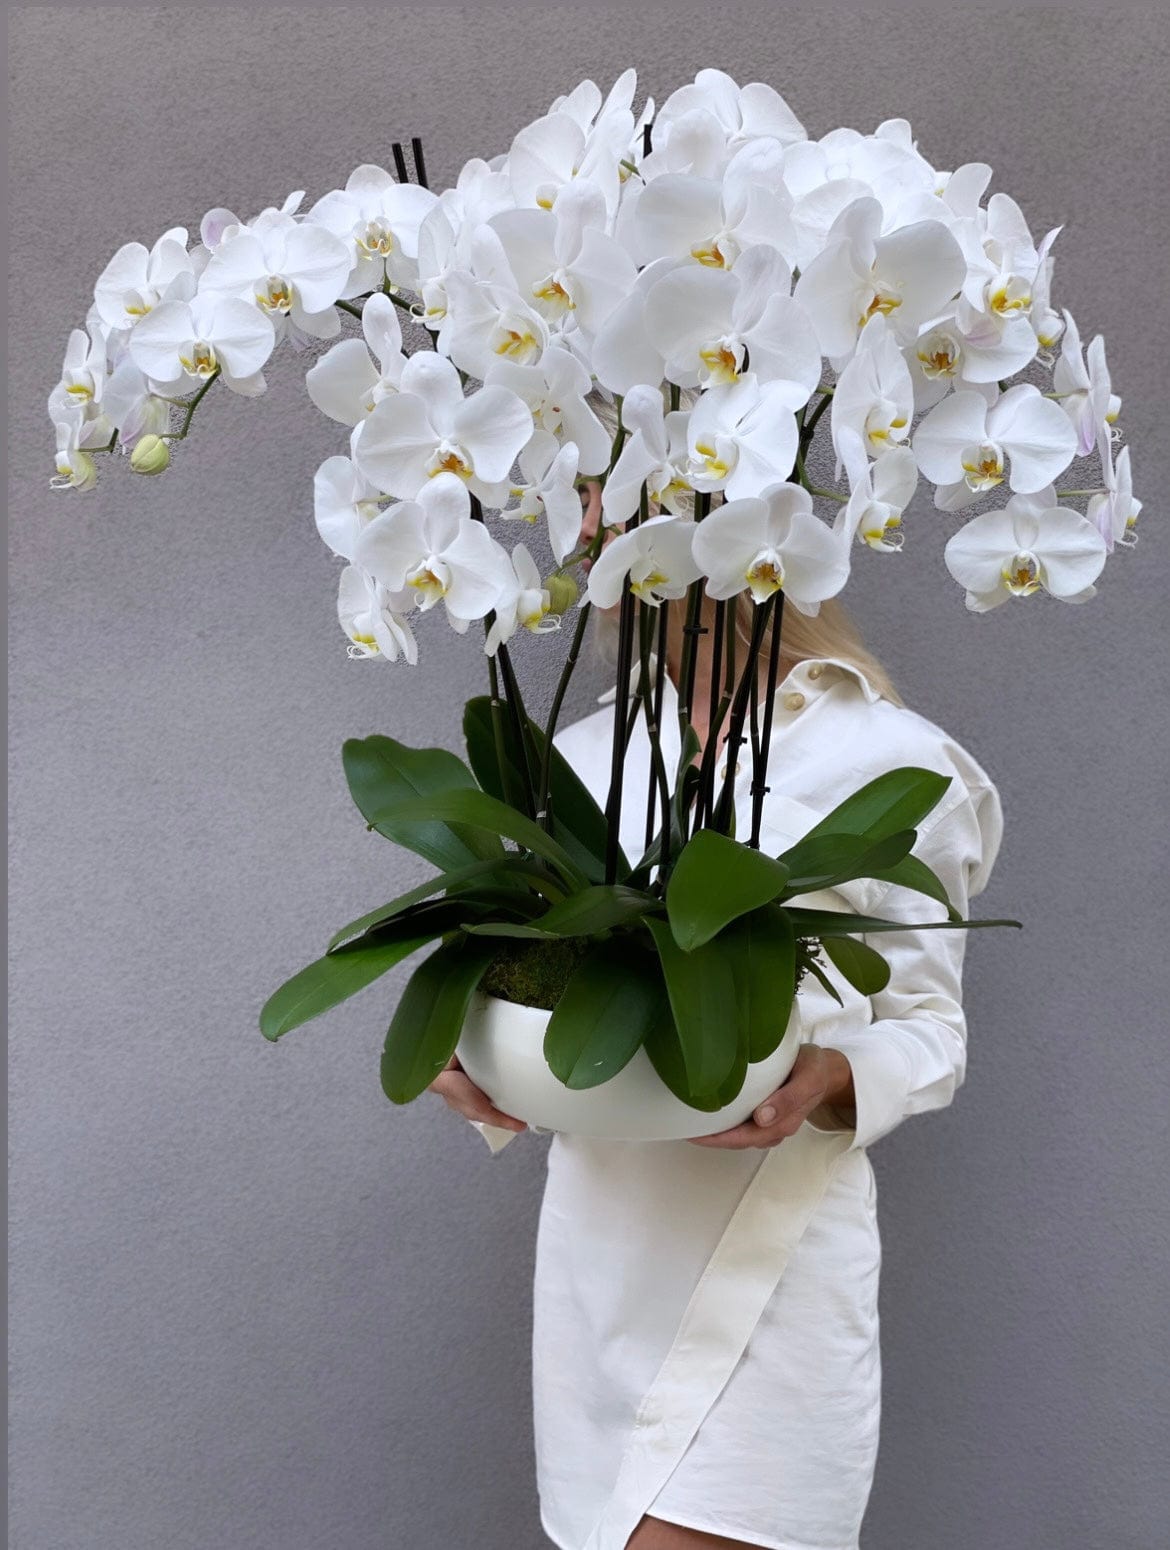 Stylish white orchids in a ceramic vase